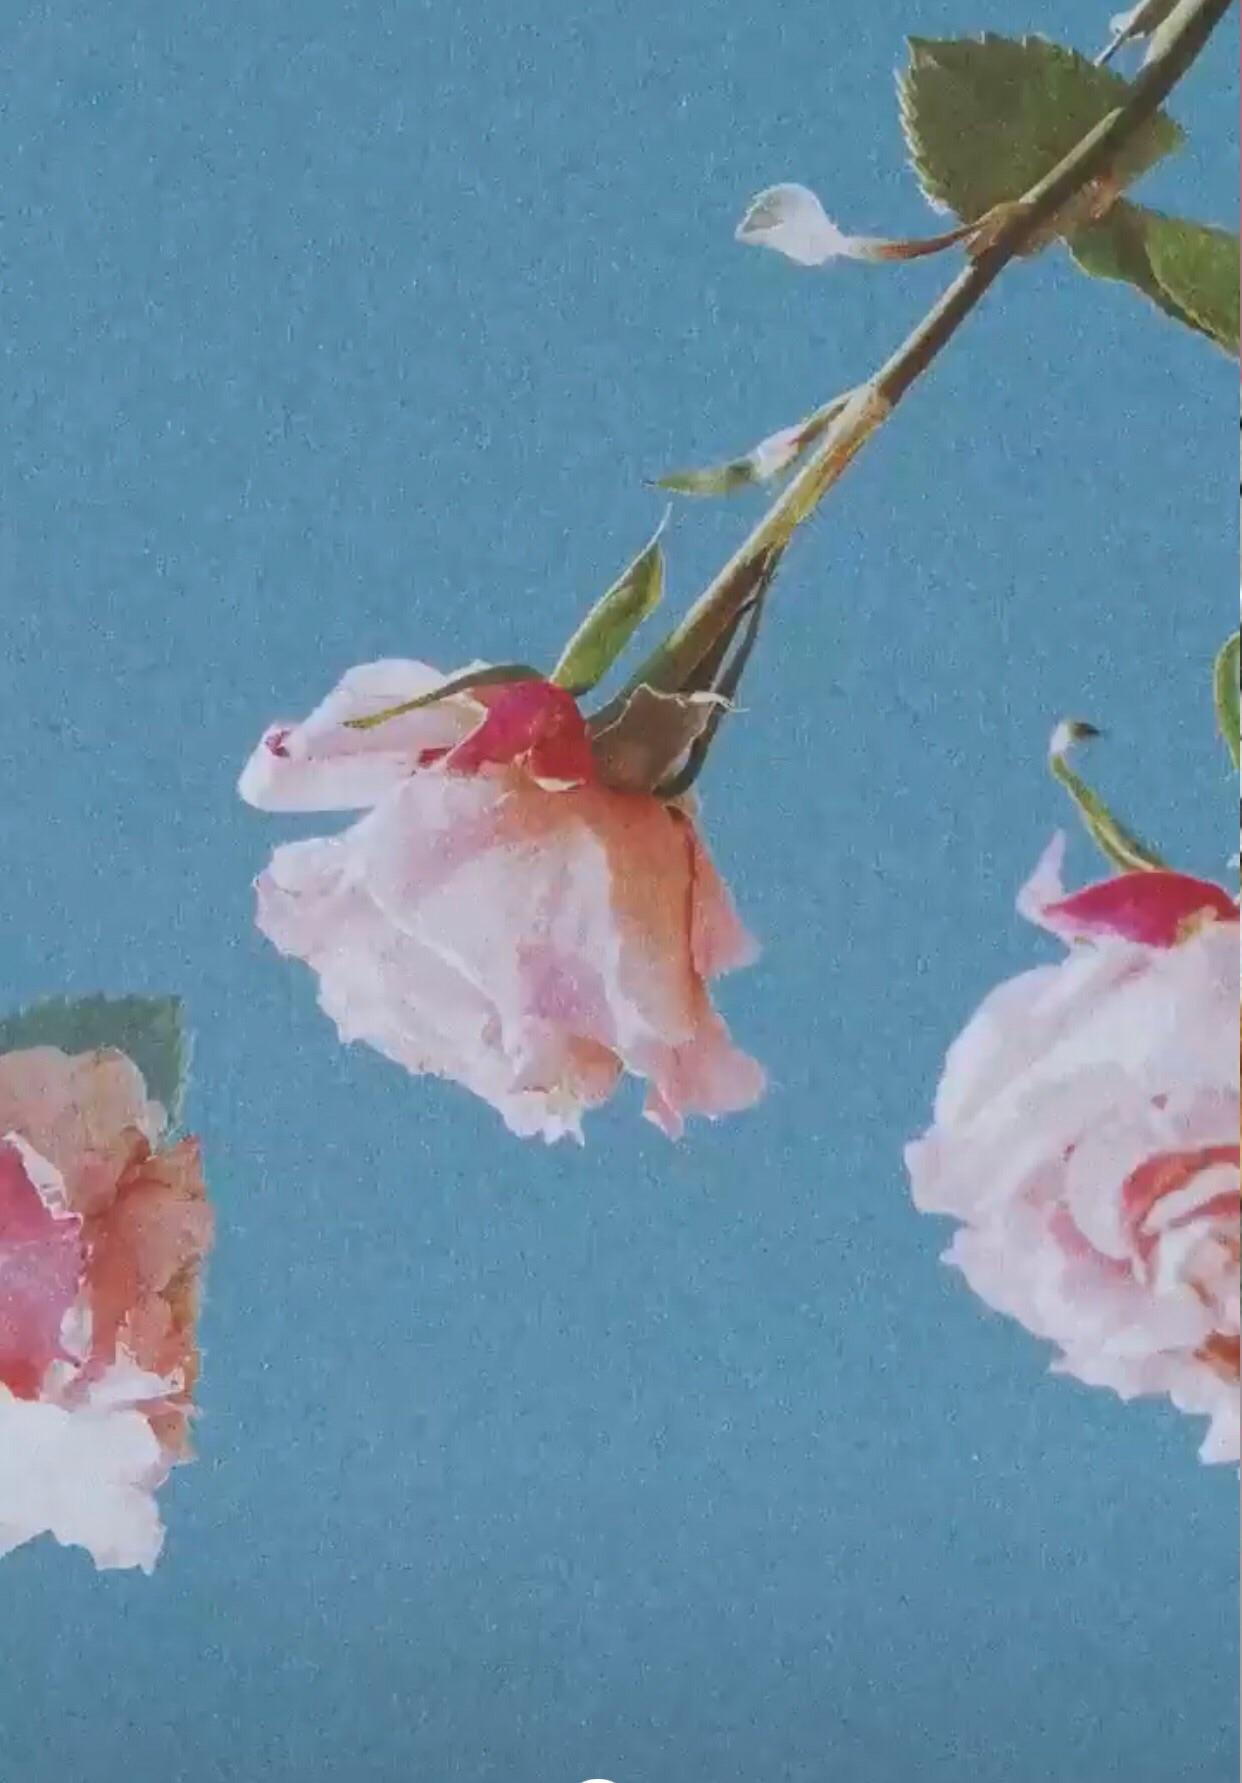 Idk if anyone has posted this but this is the background for the merch ad Taylor has on her stories without any letters. I thought it was cute AF for a wallpaper